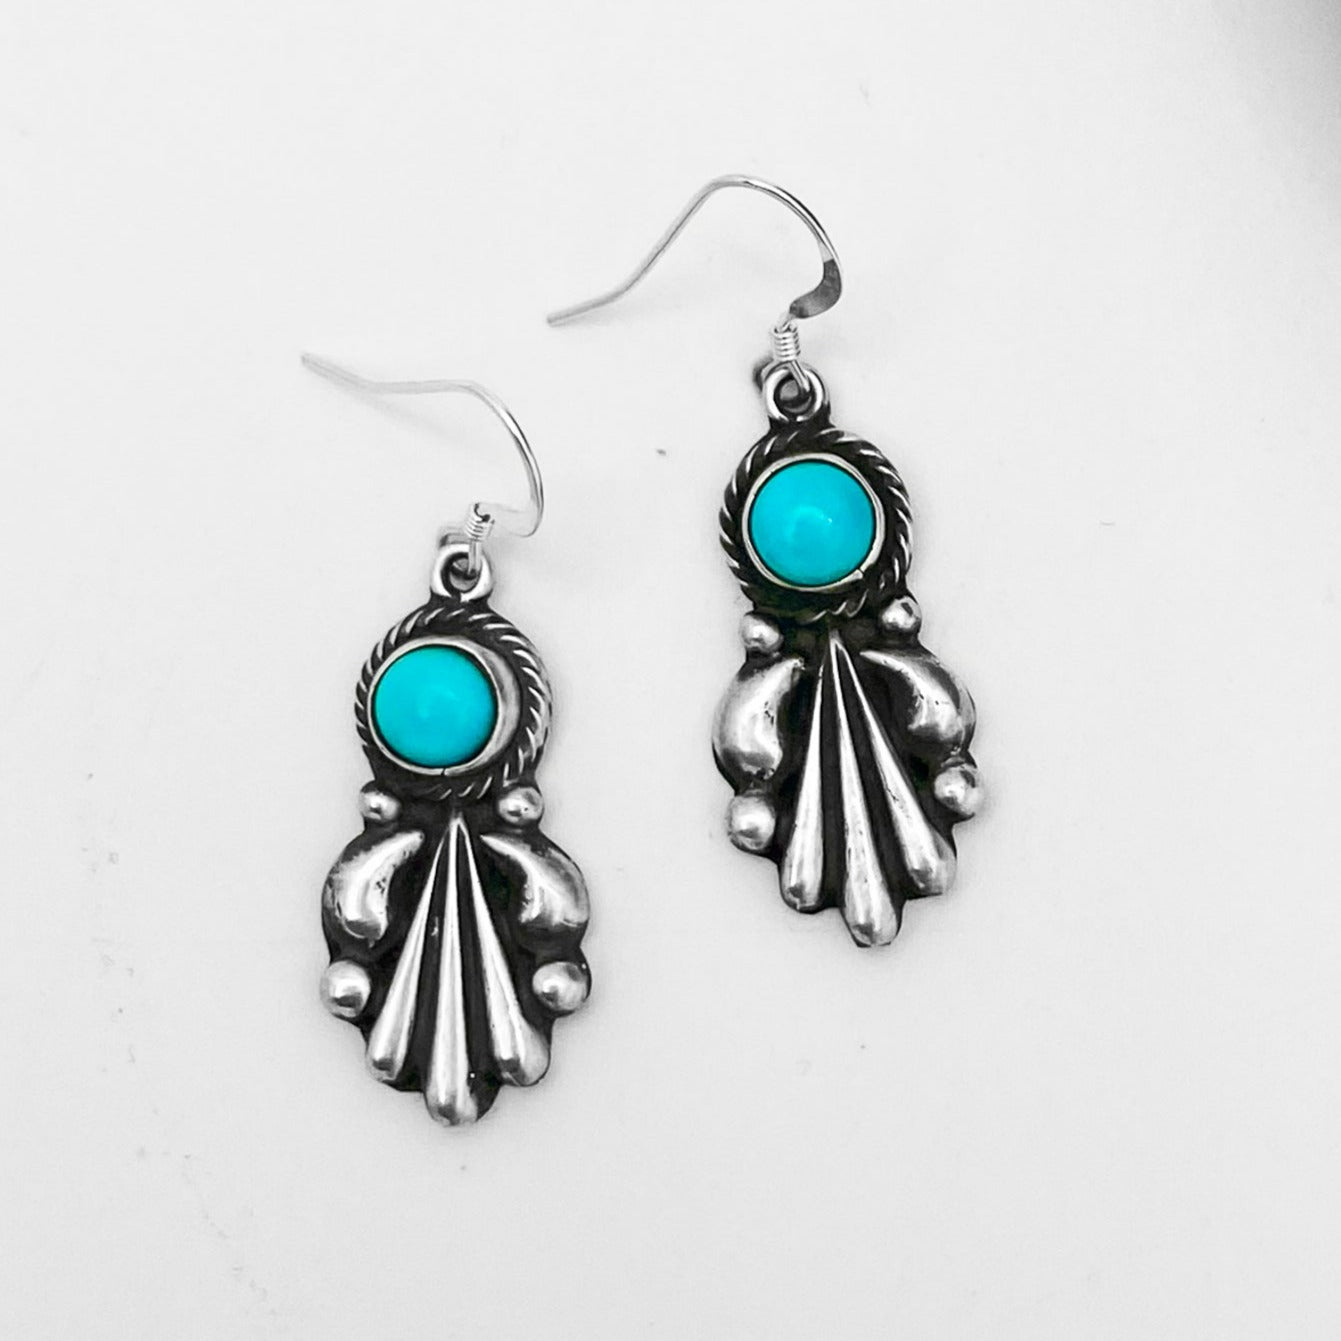 Small circular Navajo Turquoise set in cascading 925 Sterling Silver fan design - old pawn style with braided frame around the stone - Southwestern Traditonal - Clearly Hallmarked - Annie Springer from New Mexico